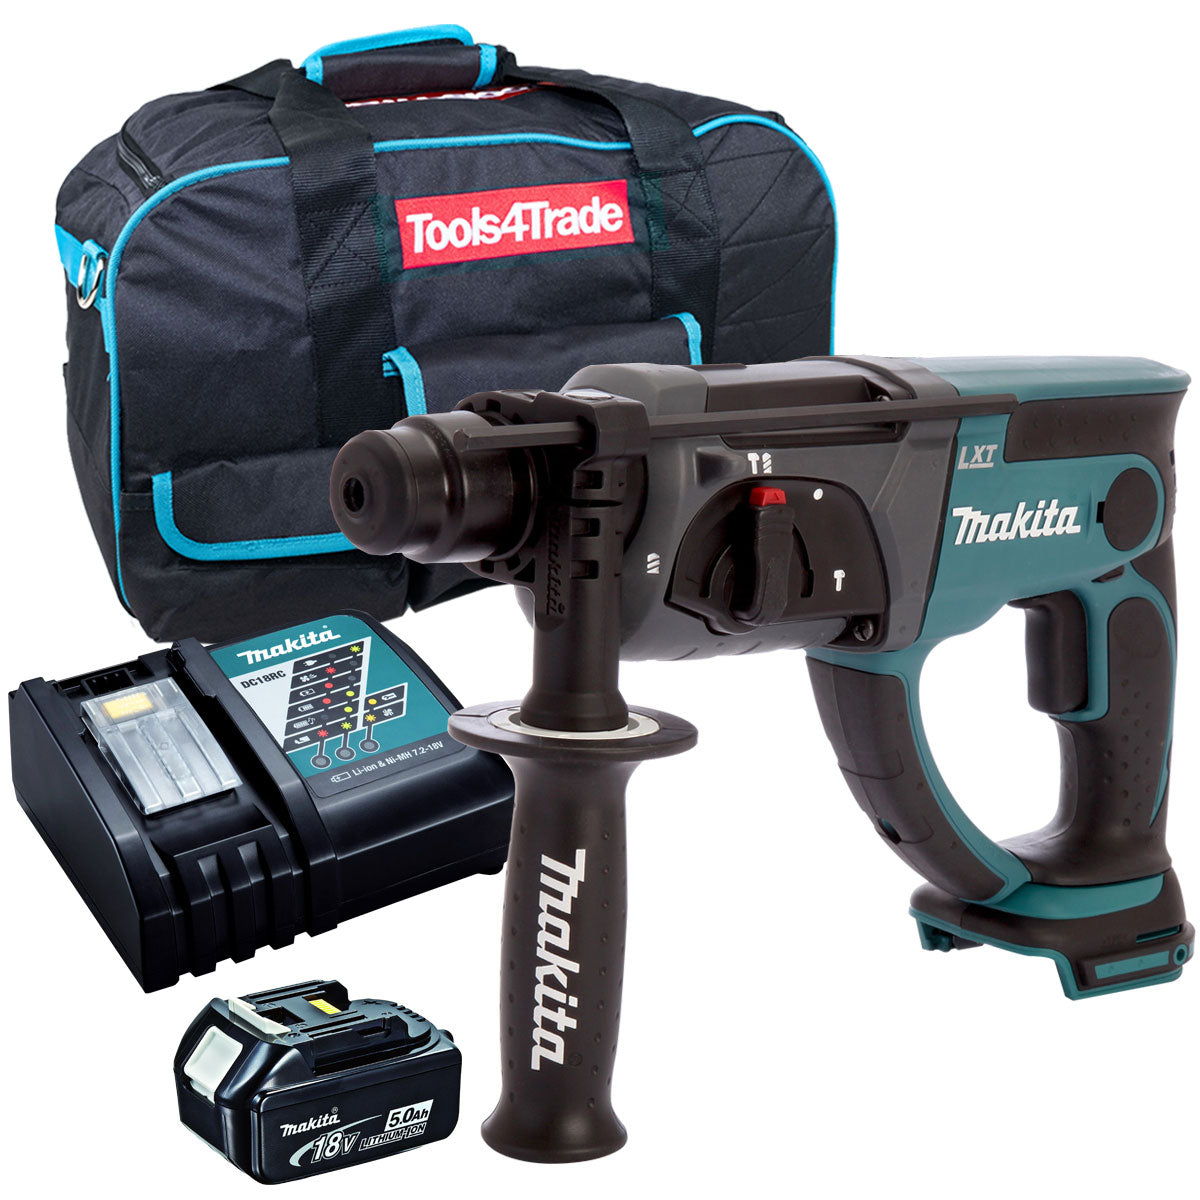 Makita DHR202Z 18V SDS+ Rotary Hammer Drill with 1 x 5.0Ah Battery Charger & Bag